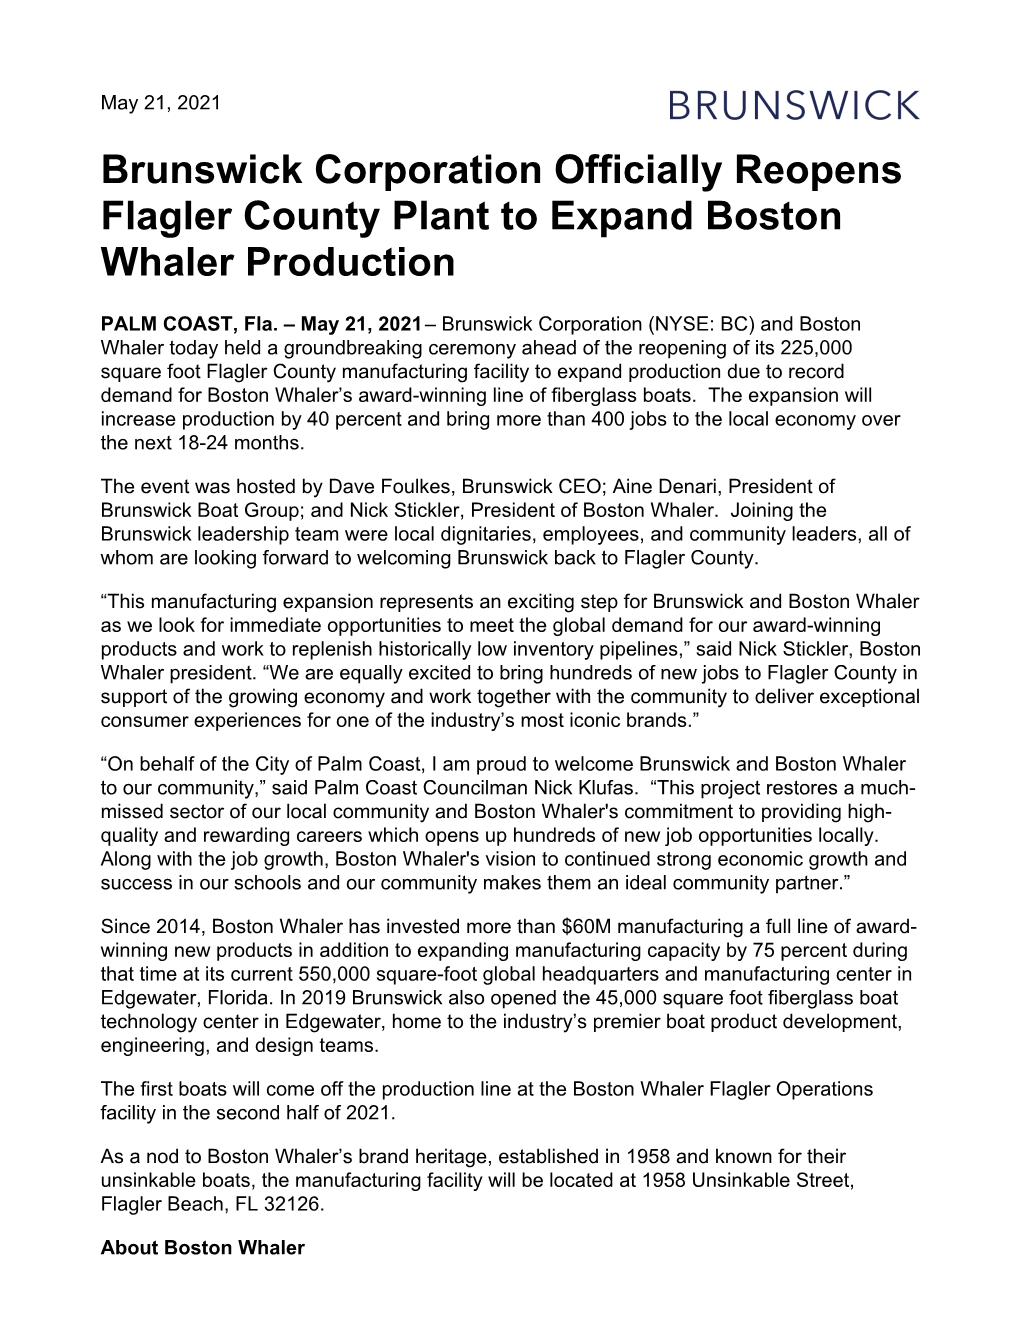 Brunswick Corporation Officially Reopens Flagler County Plant to Expand Boston Whaler Production